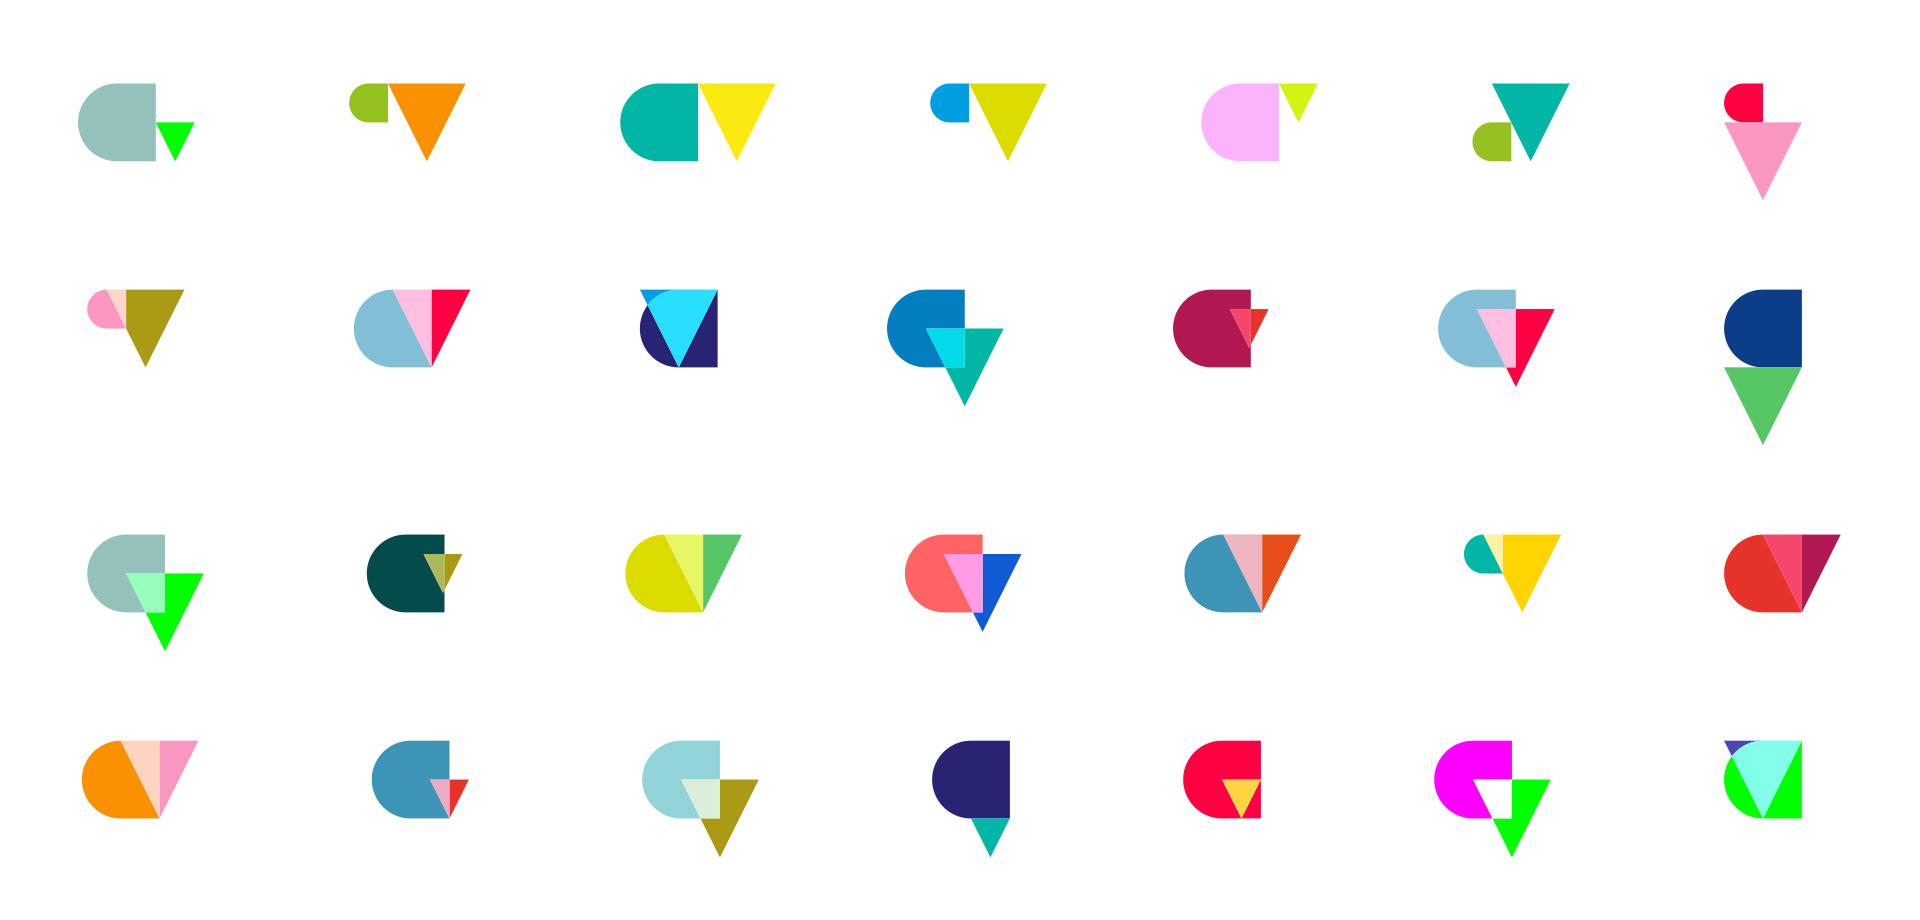 The flexible logo for Cyber Valley allows almost infinite symbol versions